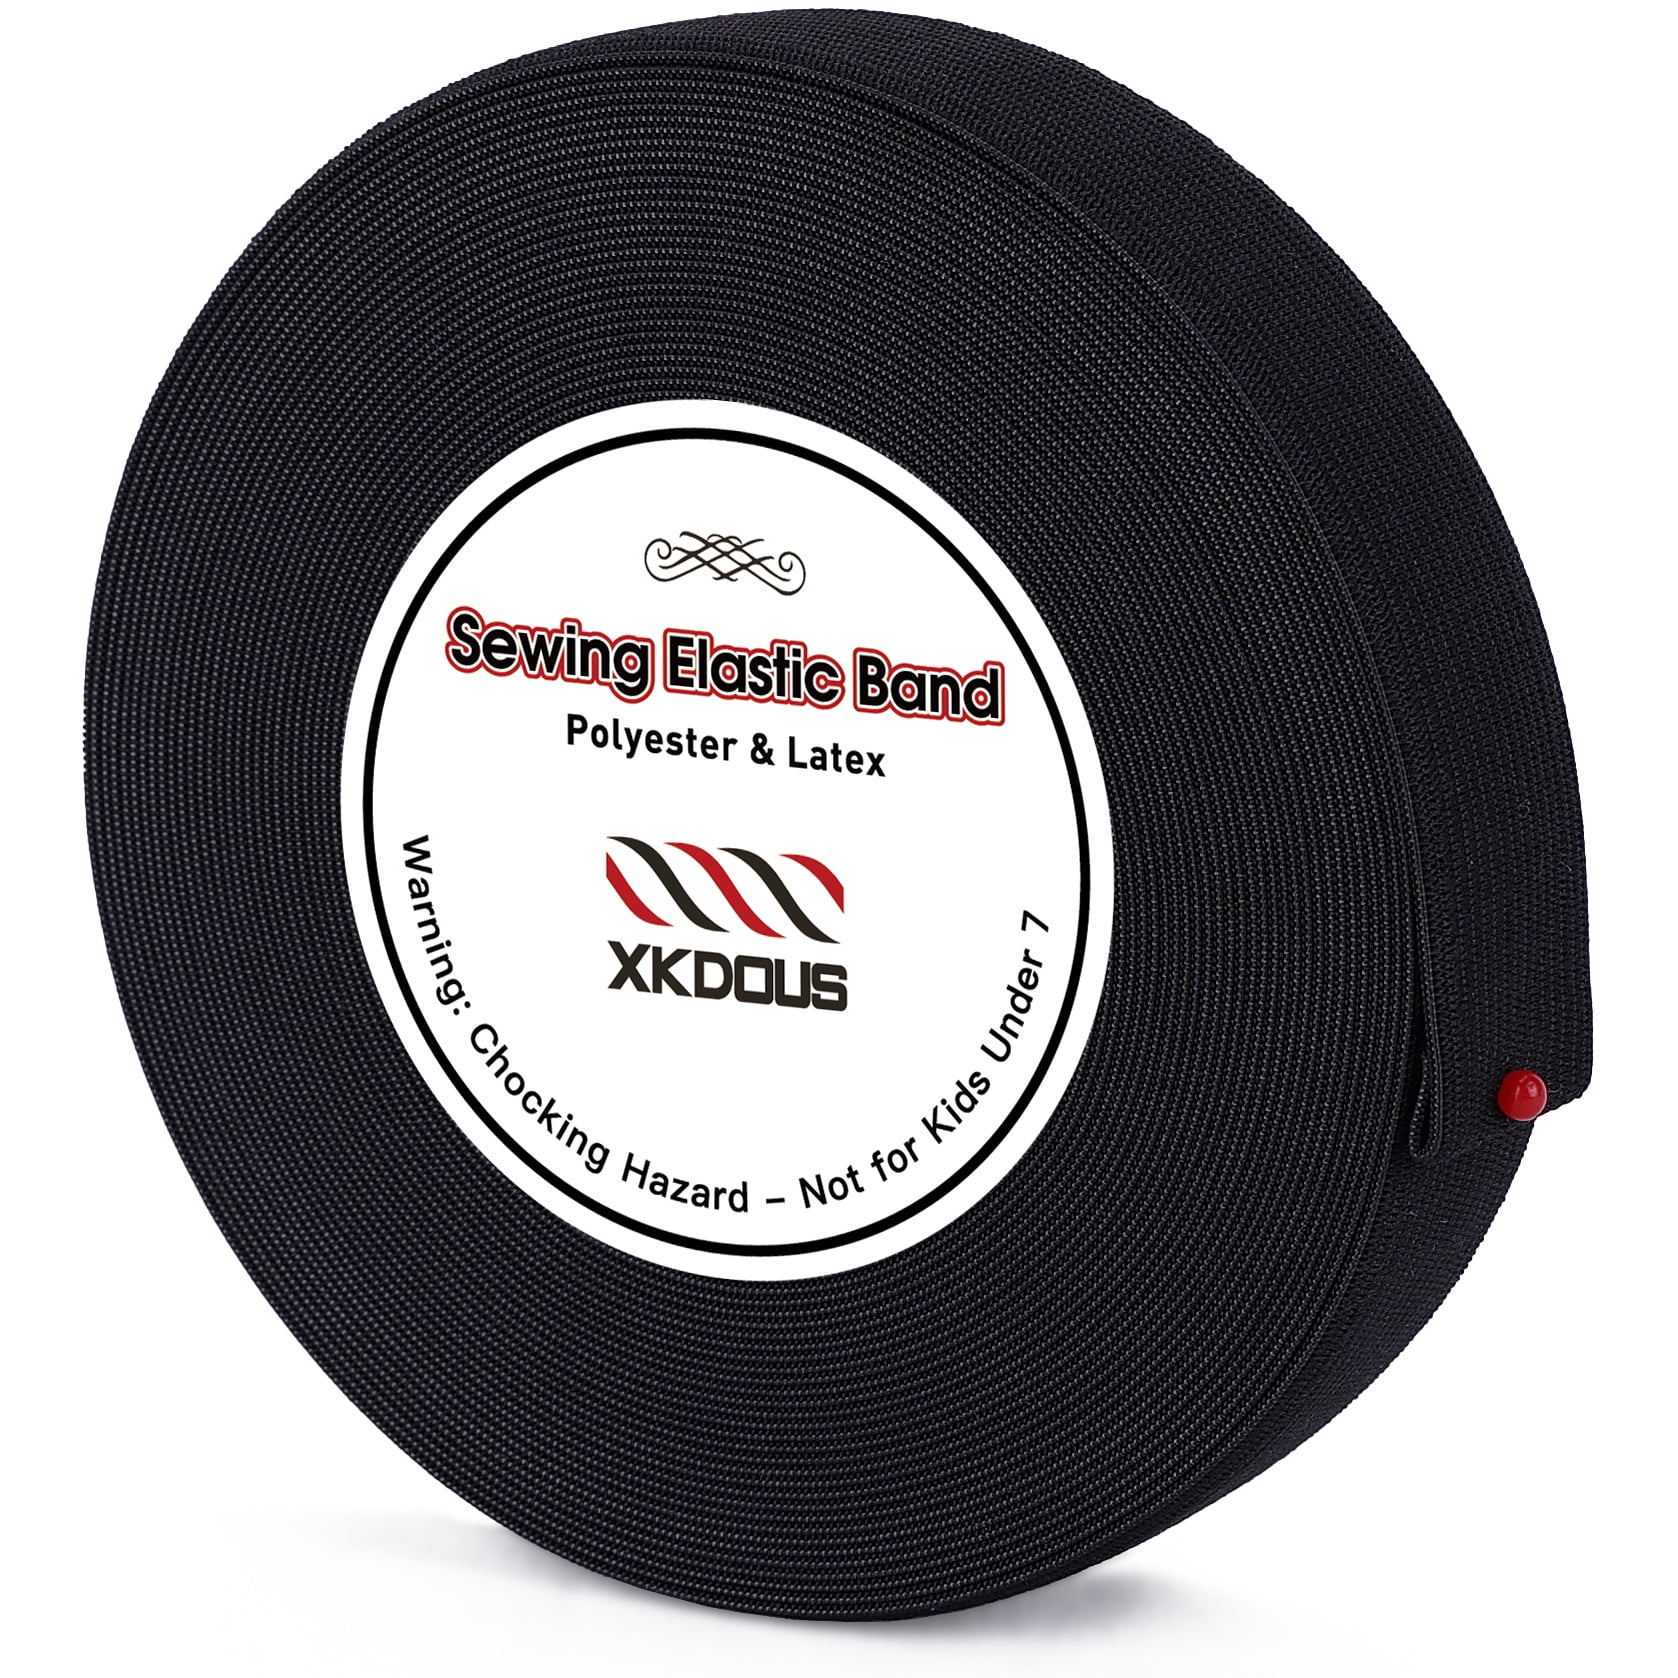 XKDOUS Elastic Band for Sewing 0.75 Inch 16 Yards 2 Roll Knit Elastic Bands  for Sewing Waistband and Pants Waist High Elasticity(8 Yard White 8 Yard  Black) Black+White 2 rolls*0.75 inches*8 yards